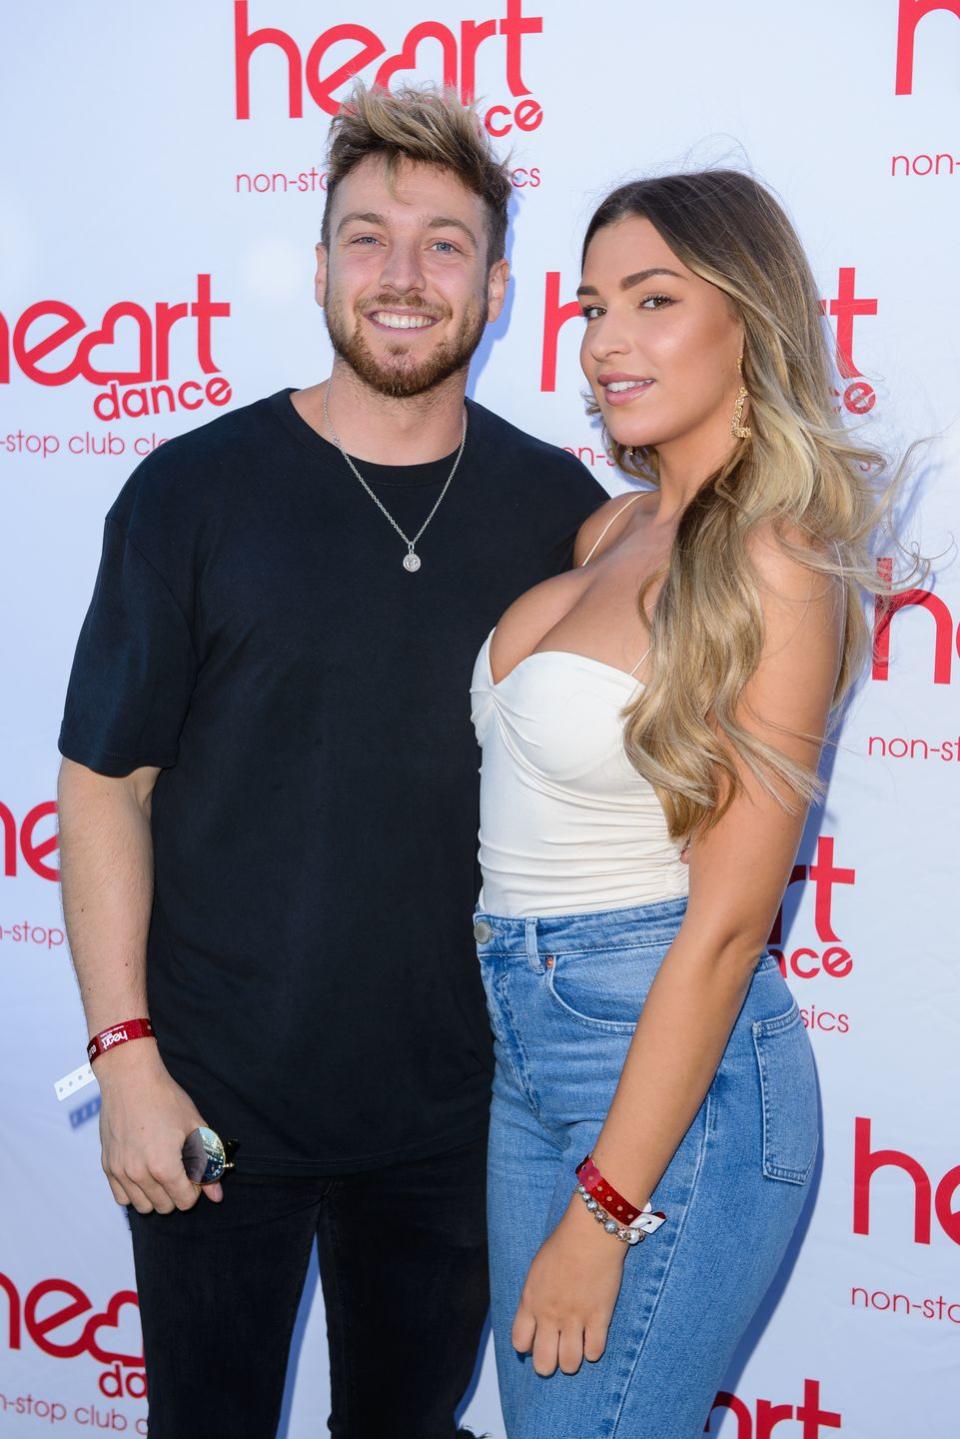 london, england july 03 sam thompson and zara mcdermott attend the heart dance media launch event at global radio studios on july 03, 2019 in london, england photo by joe mahergetty images